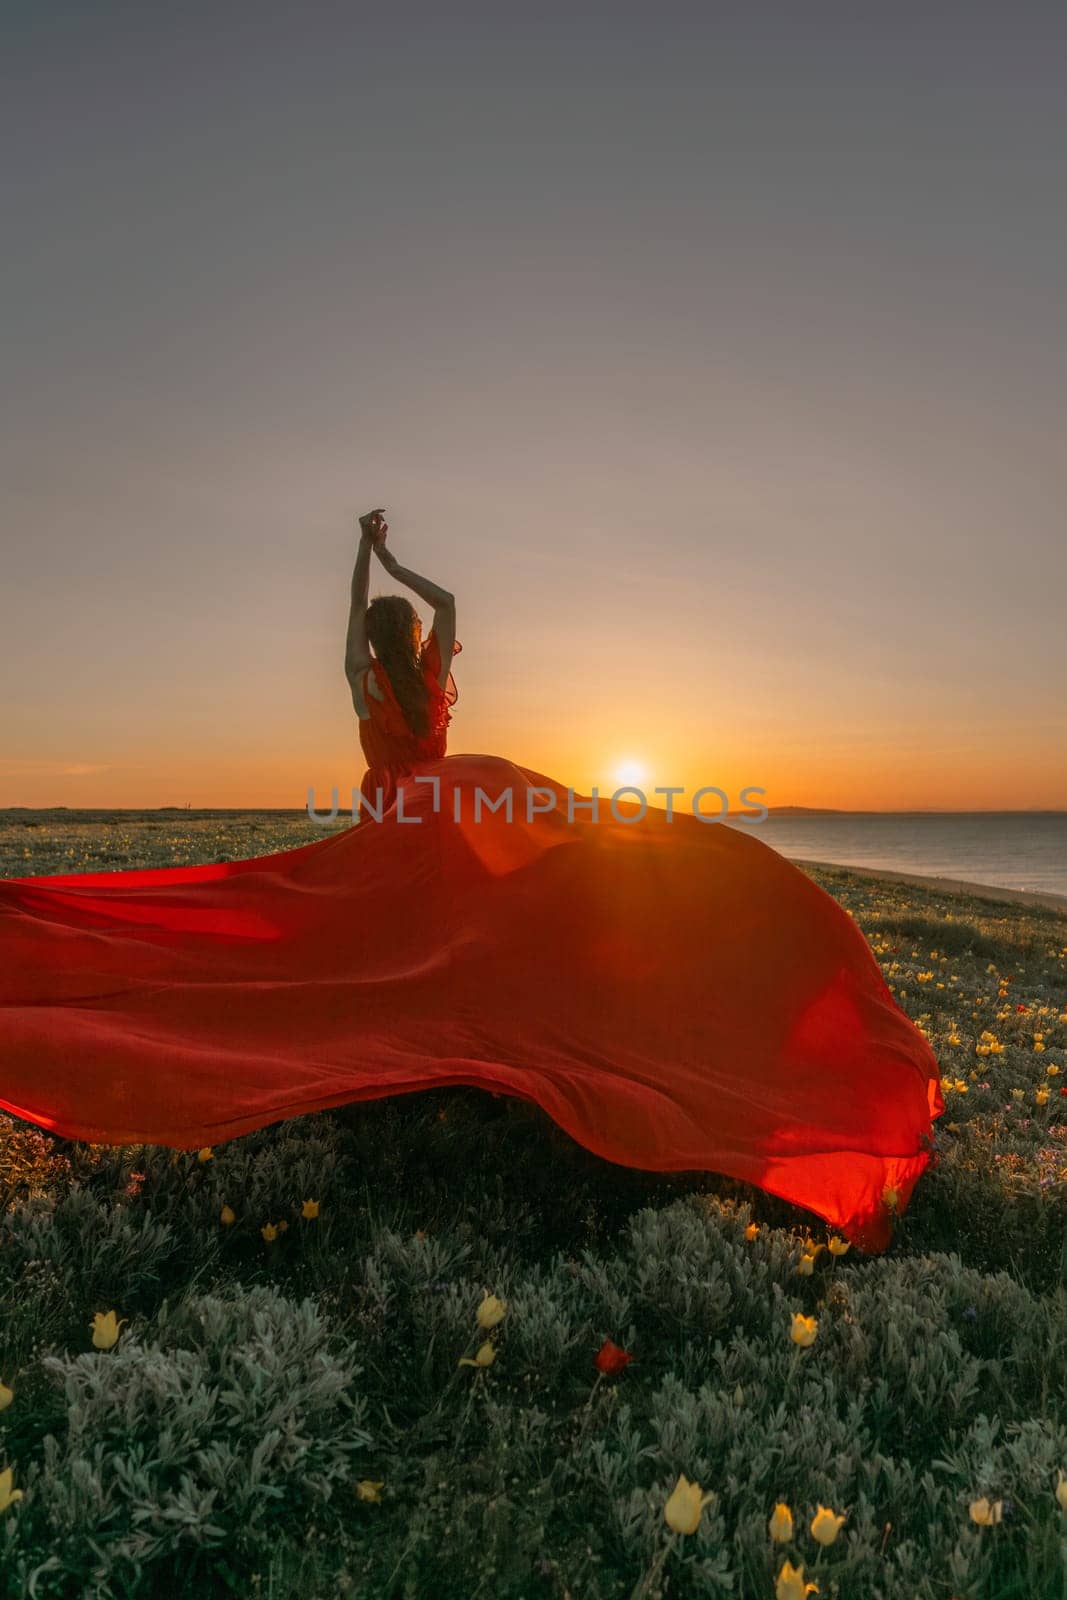 A woman in a red dress is standing in a field with the sun setting behind her. She is reaching up with her arms outstretched, as if she is trying to catch the sun. The scene is serene and peaceful. by Matiunina